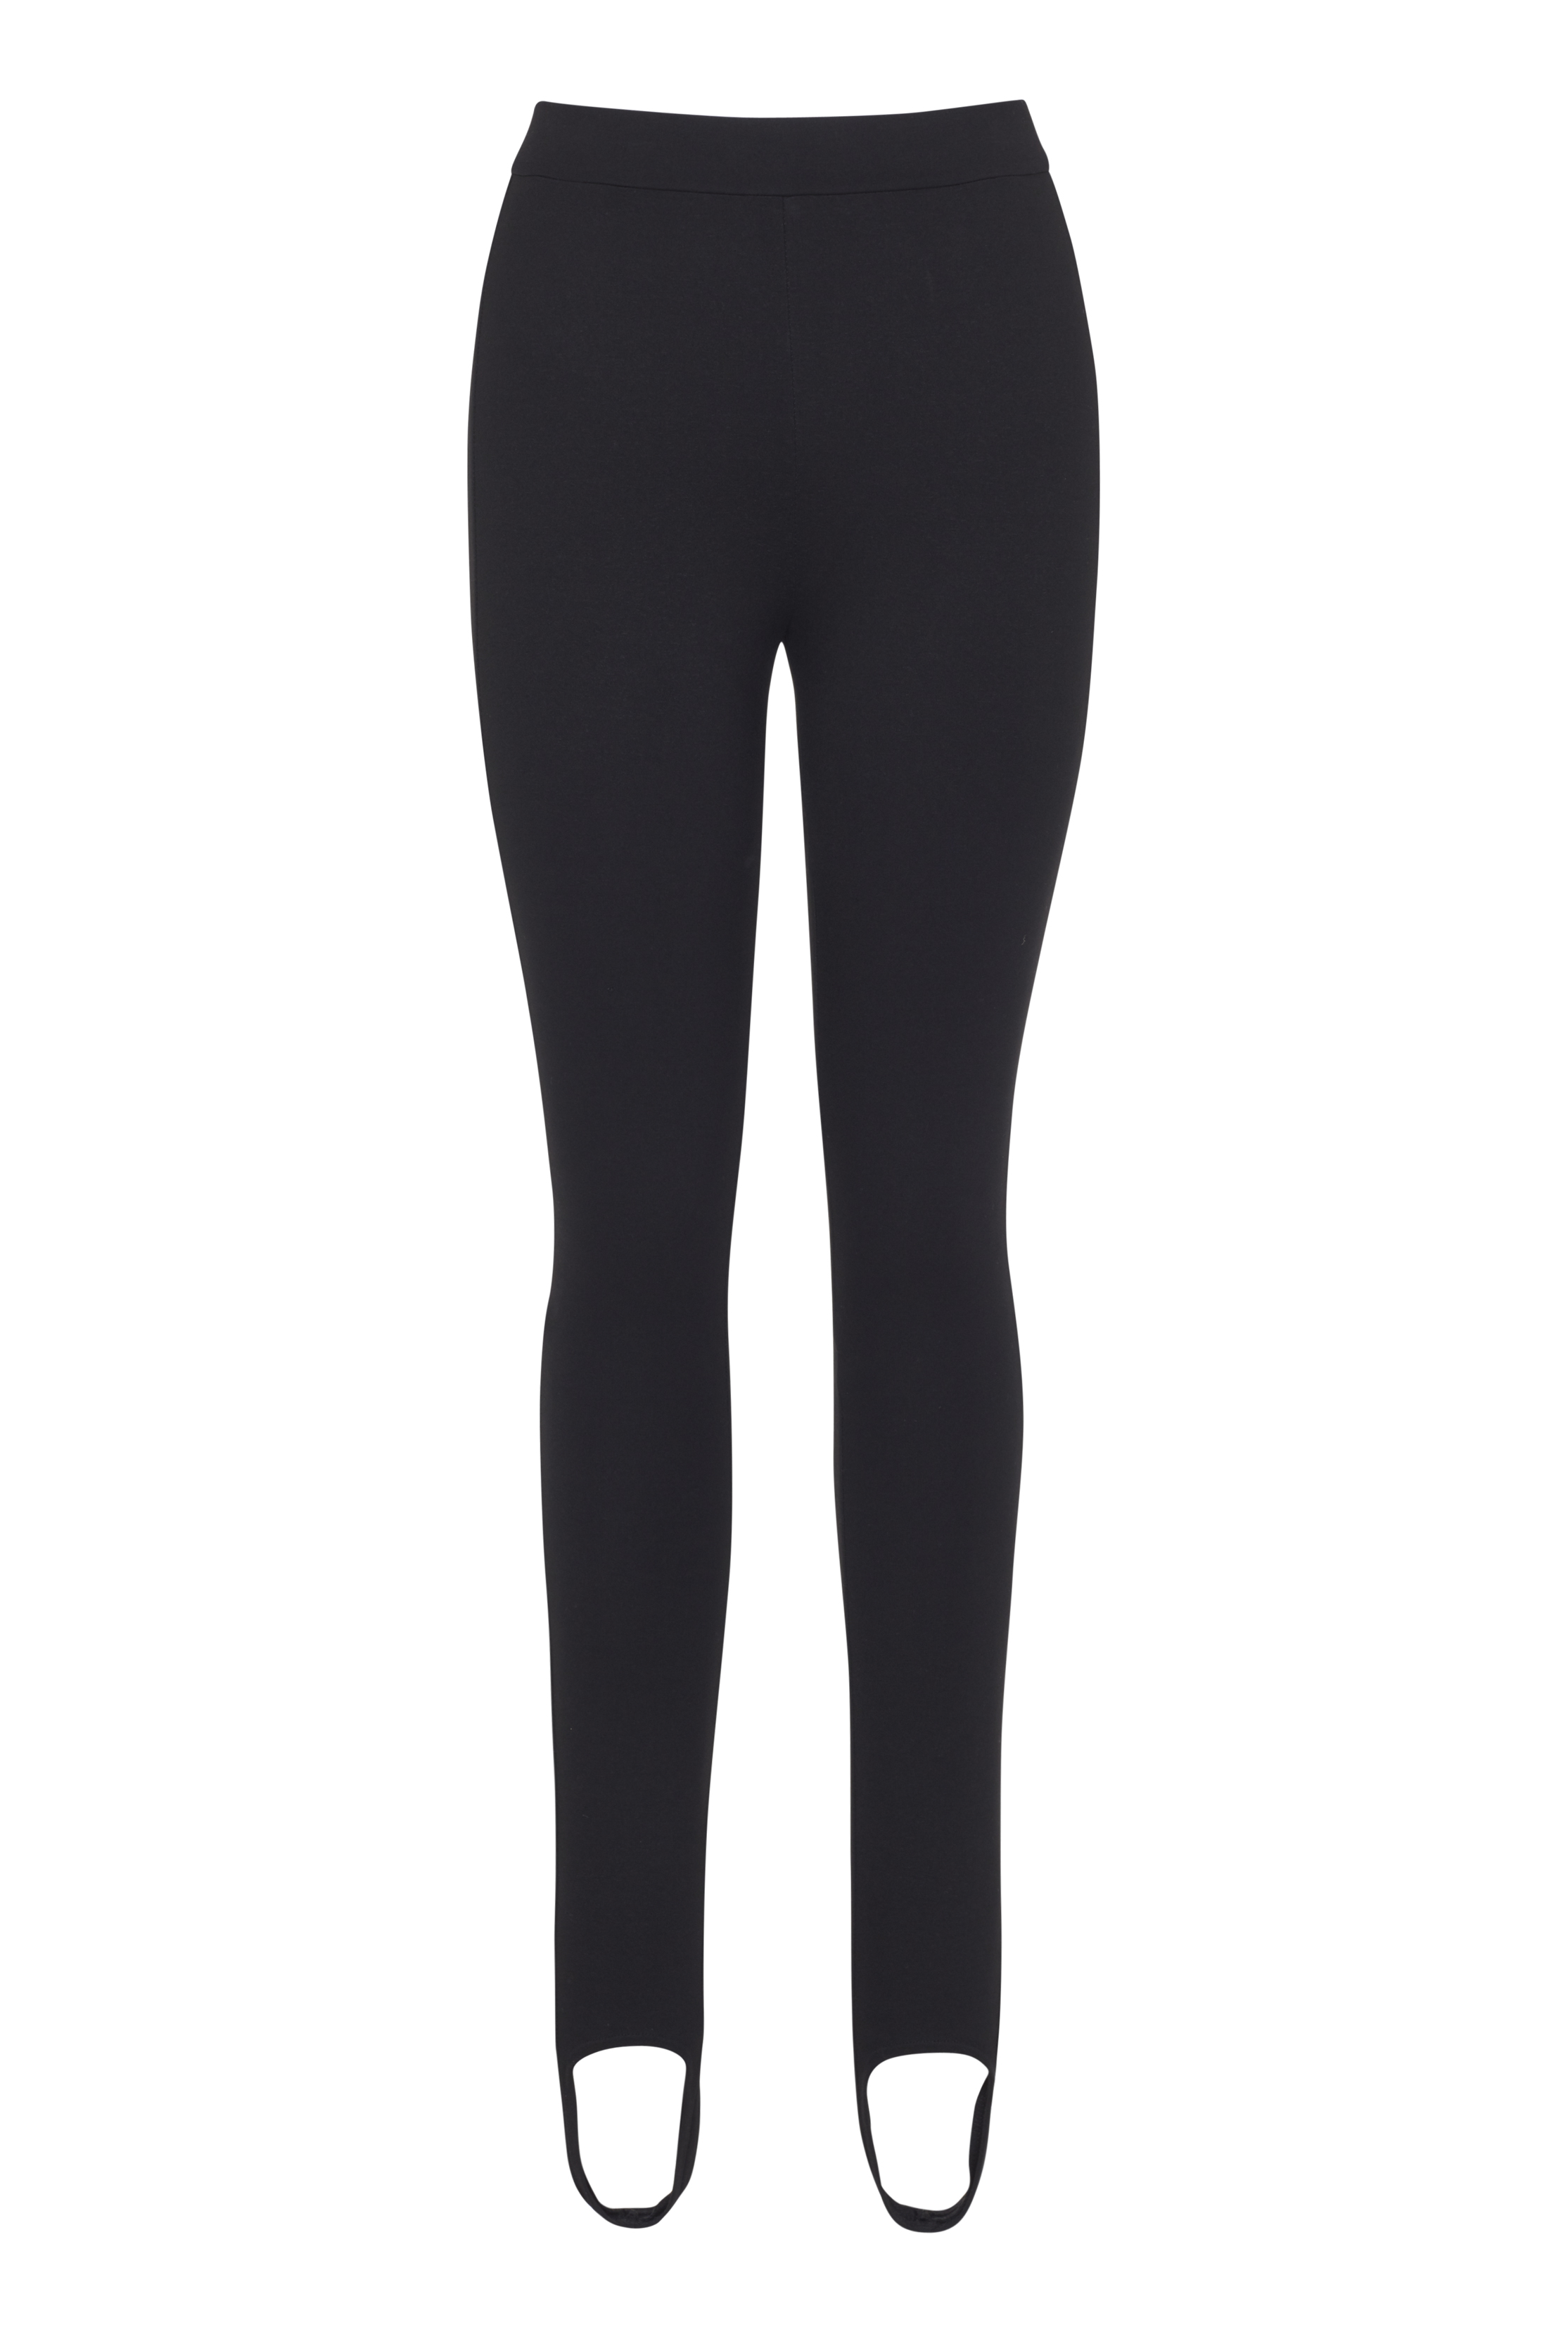 Stirrup Leggings For Tall Women  International Society of Precision  Agriculture